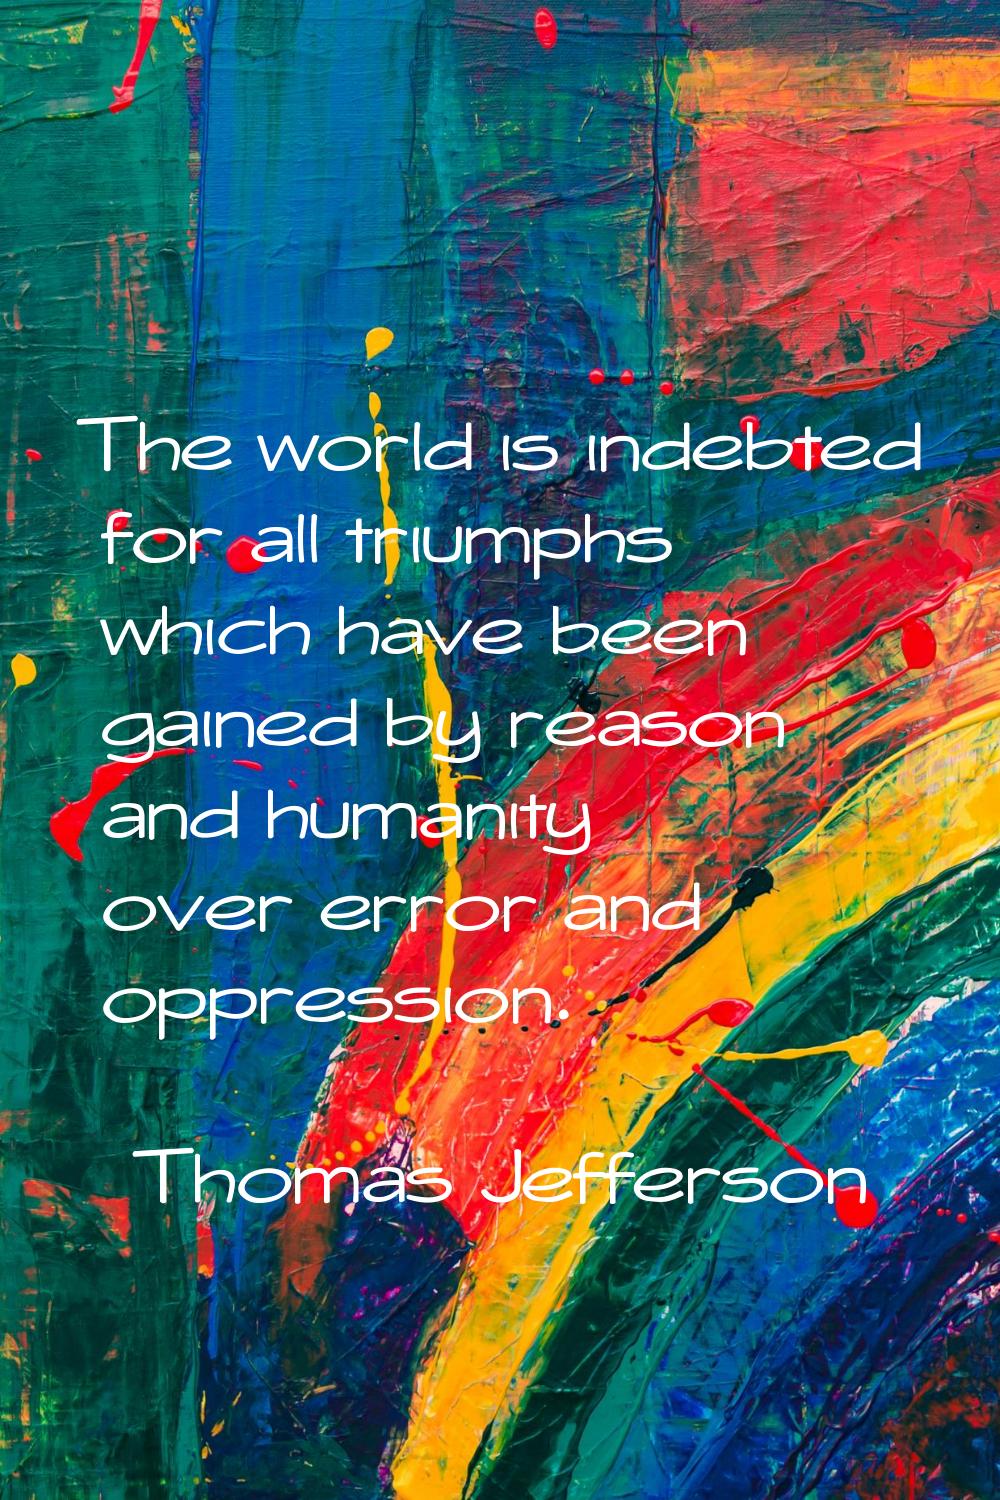 The world is indebted for all triumphs which have been gained by reason and humanity over error and